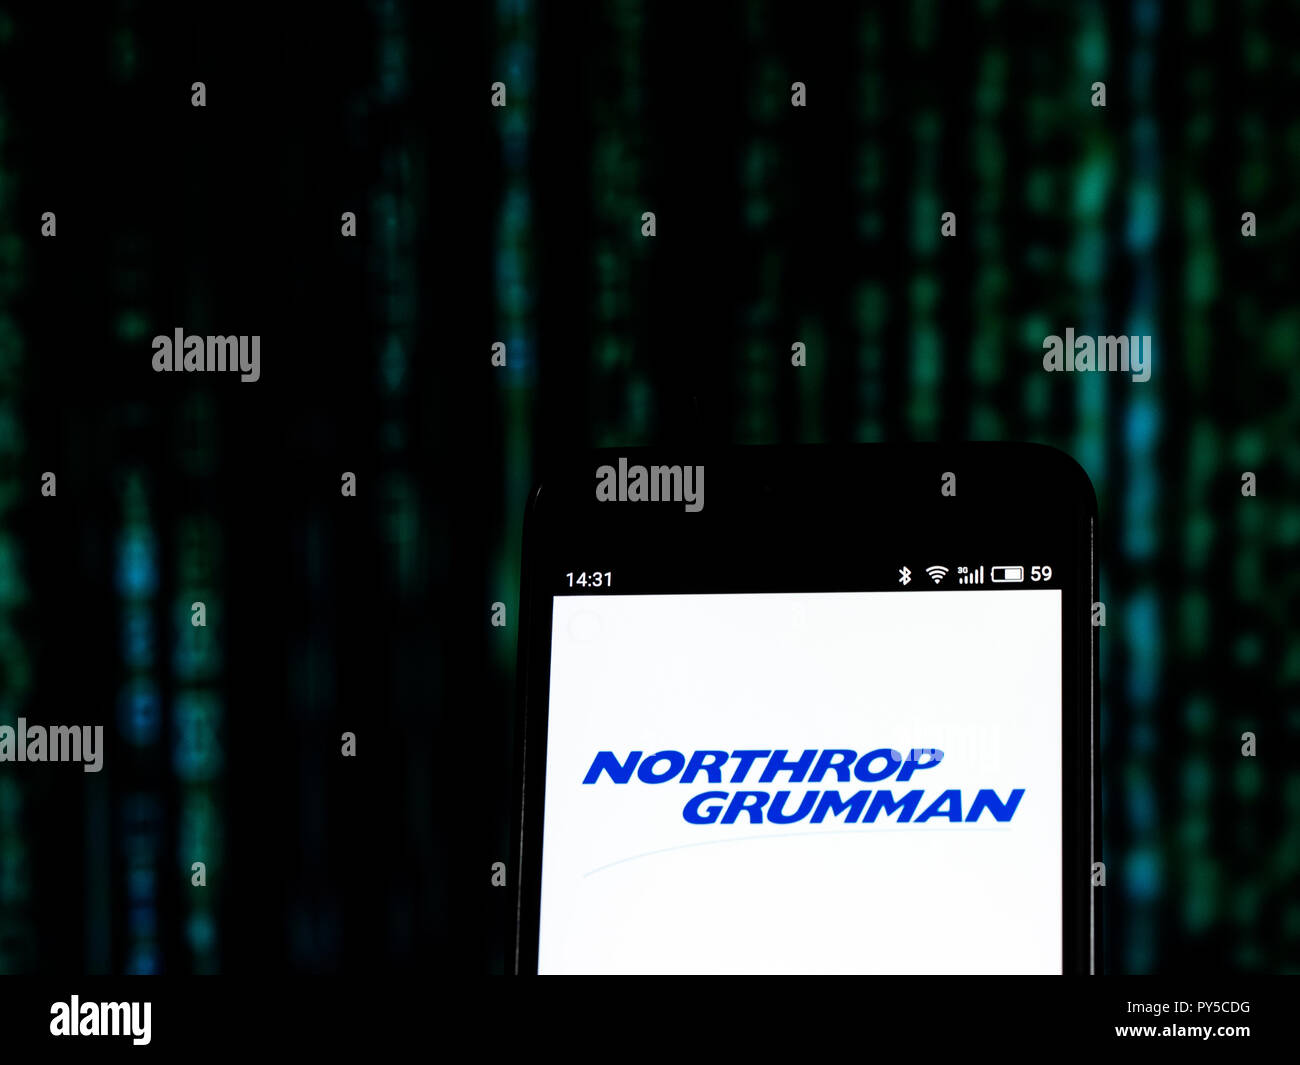 Northrop Grumman Aerospace and defense company logo seen displayed on smart phone. Northrop Grumman Corporation is an American global aerospace and defense technology company formed by Northrop's 1994 purchase of Grumman. The company was the fifth-largest arms trader in the world in 2015. Northrop Grumman employs over 85,000 people worldwide. It reported revenues of $24.508 billion in 2016. Stock Photo